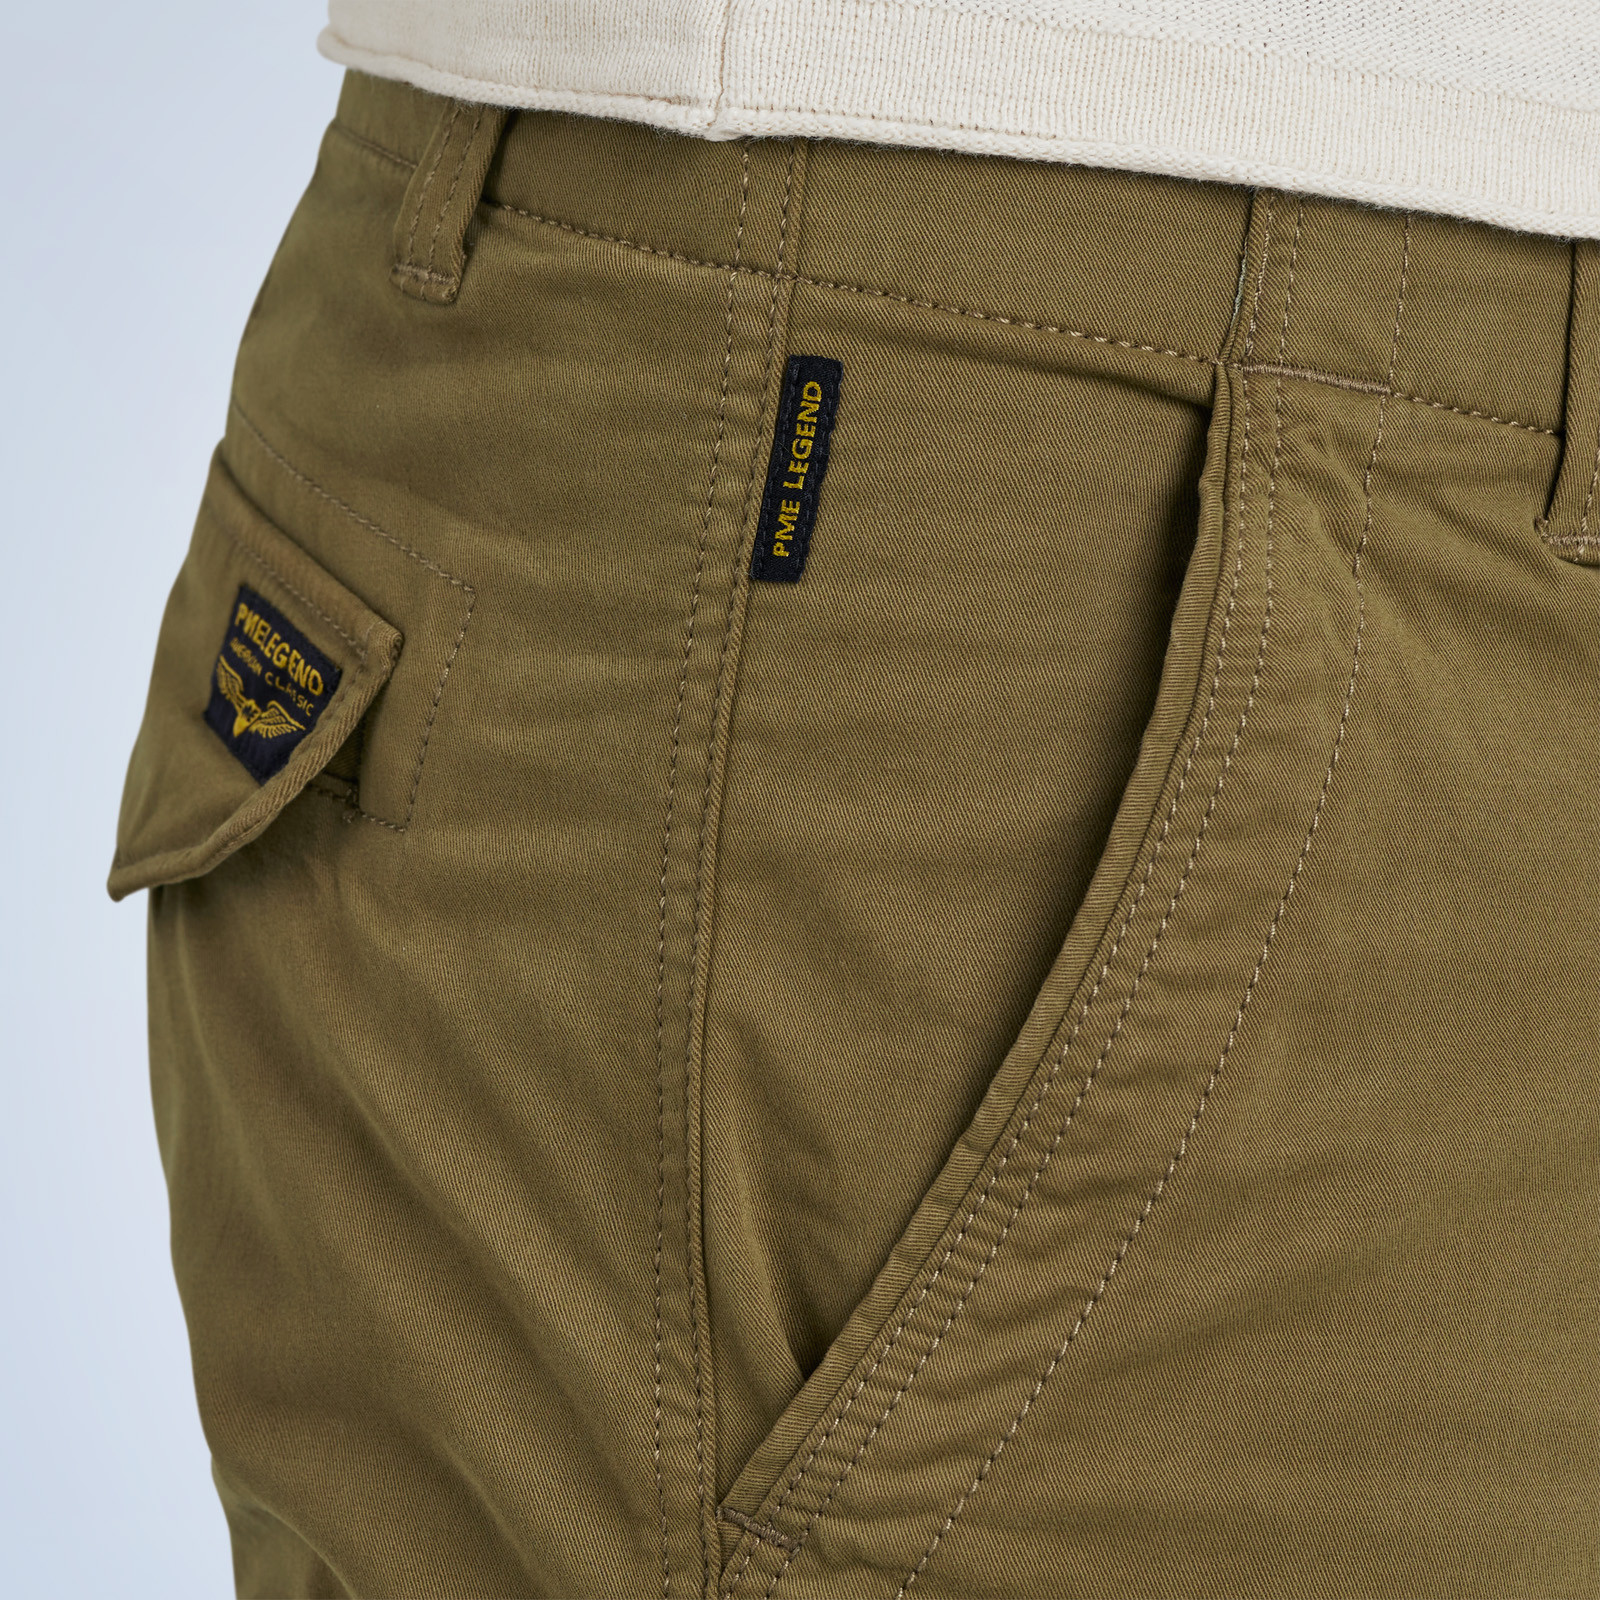 returns shipping tapered | pants | and cargo LEGEND Nordrop PME Free fit